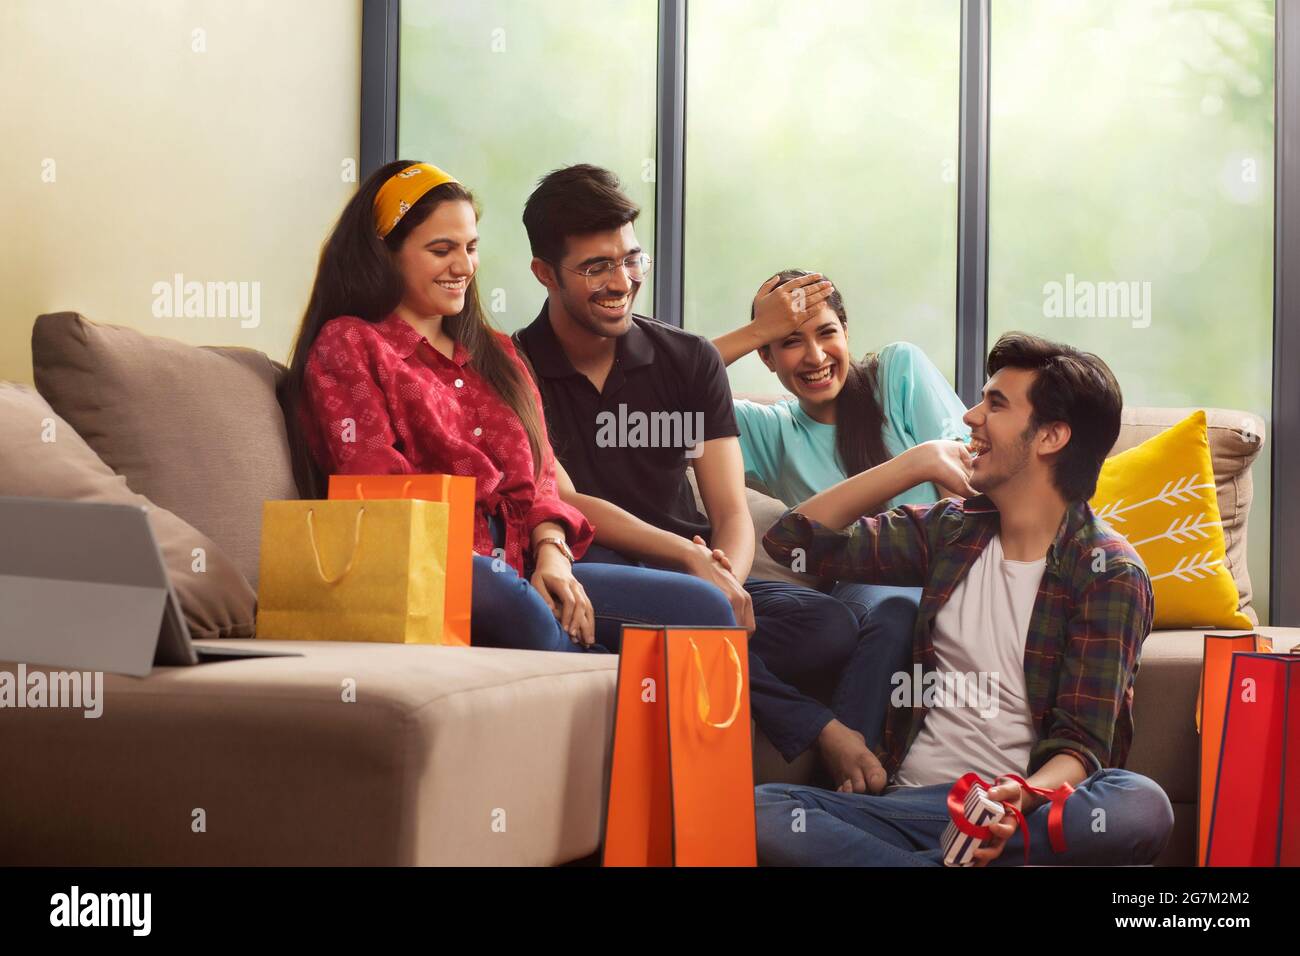 A Group of youngsters talking happily in a room after a shopping spree. Stock Photo